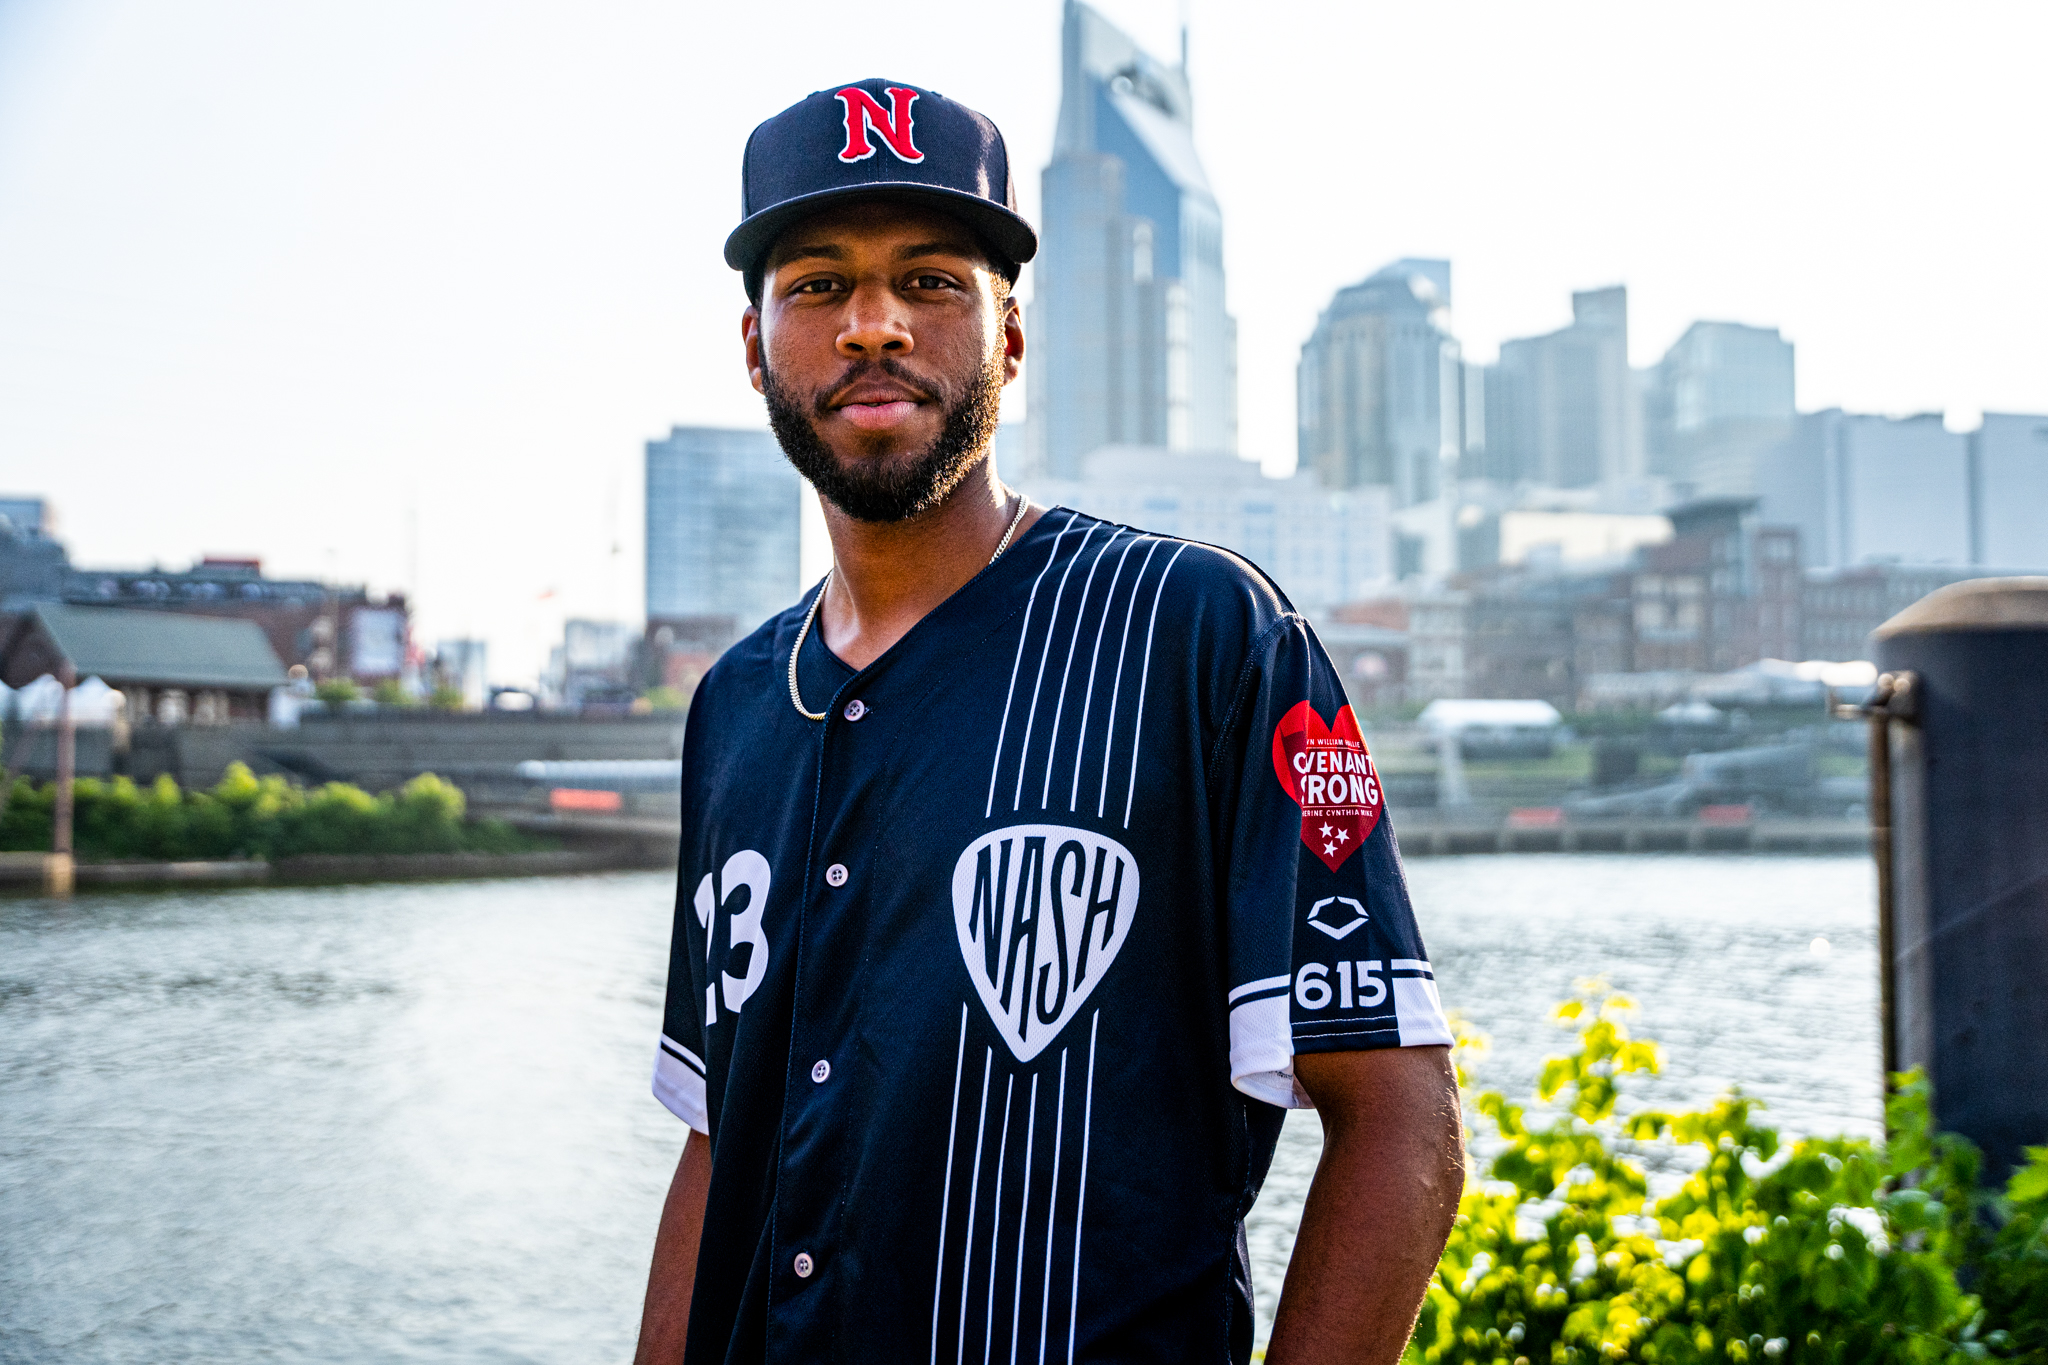 Nashville Sounds on X: On 6/15 the Sounds will wear specially designed 615  jerseys as a tribute to Nashville. These jerseys are available for auction  now with proceeds benefitting VictimsFirst and the